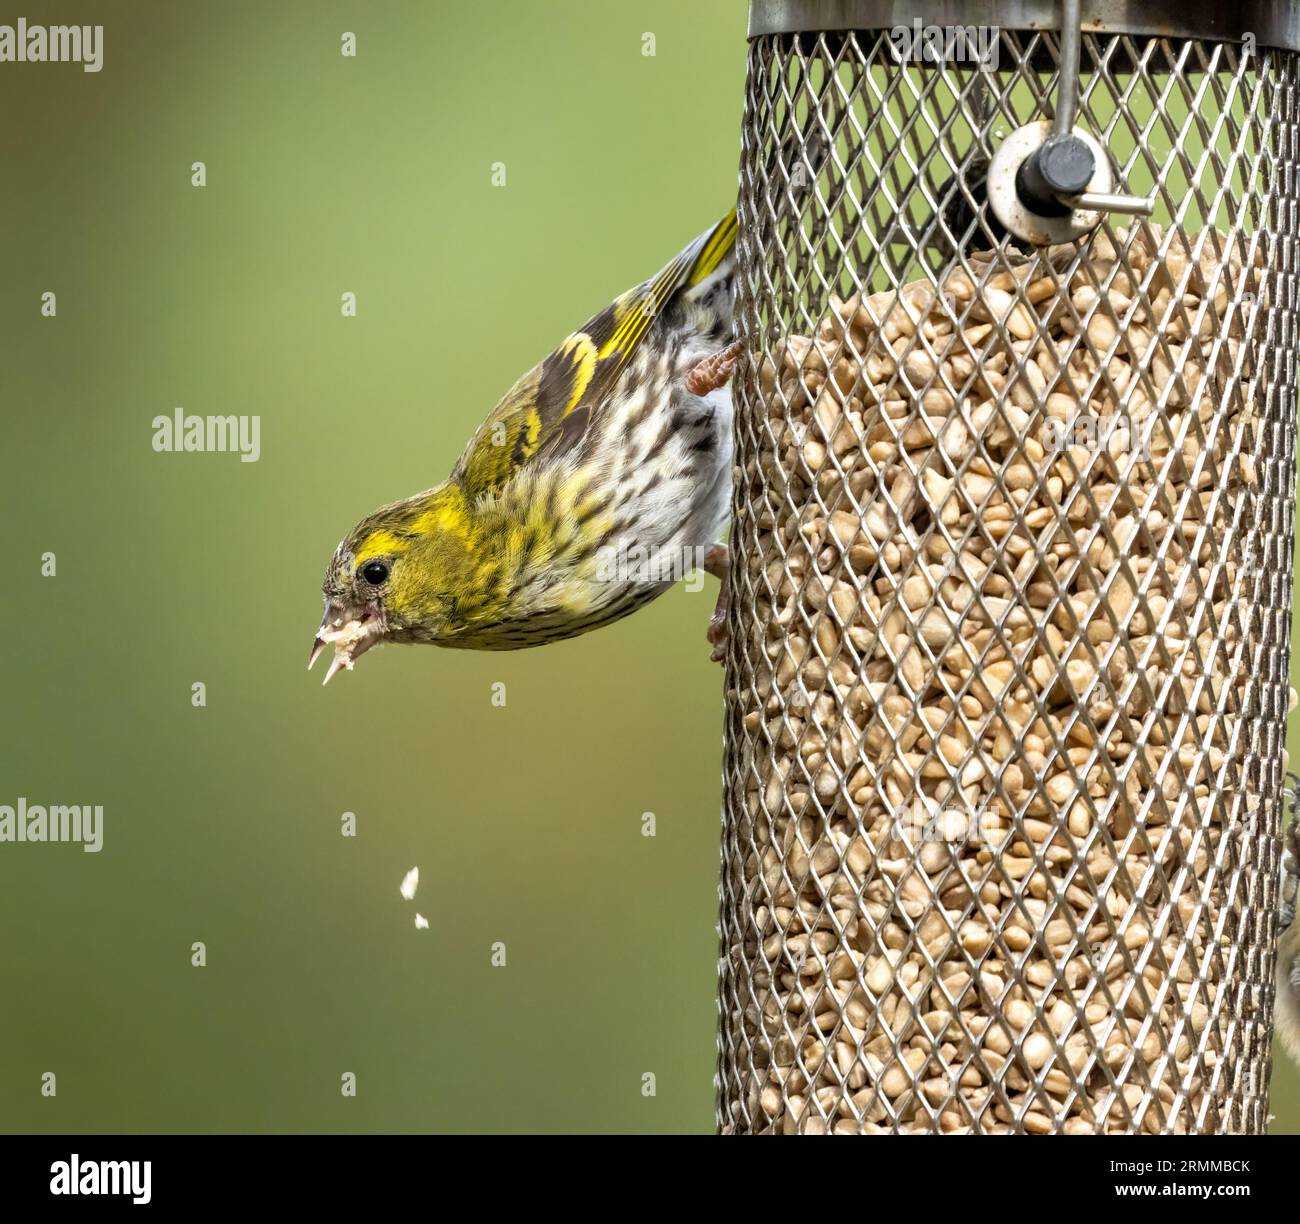 Female siskin, brightly coloured black and yellow bird on a sunflower heart feeder in the woodland Stock Photo